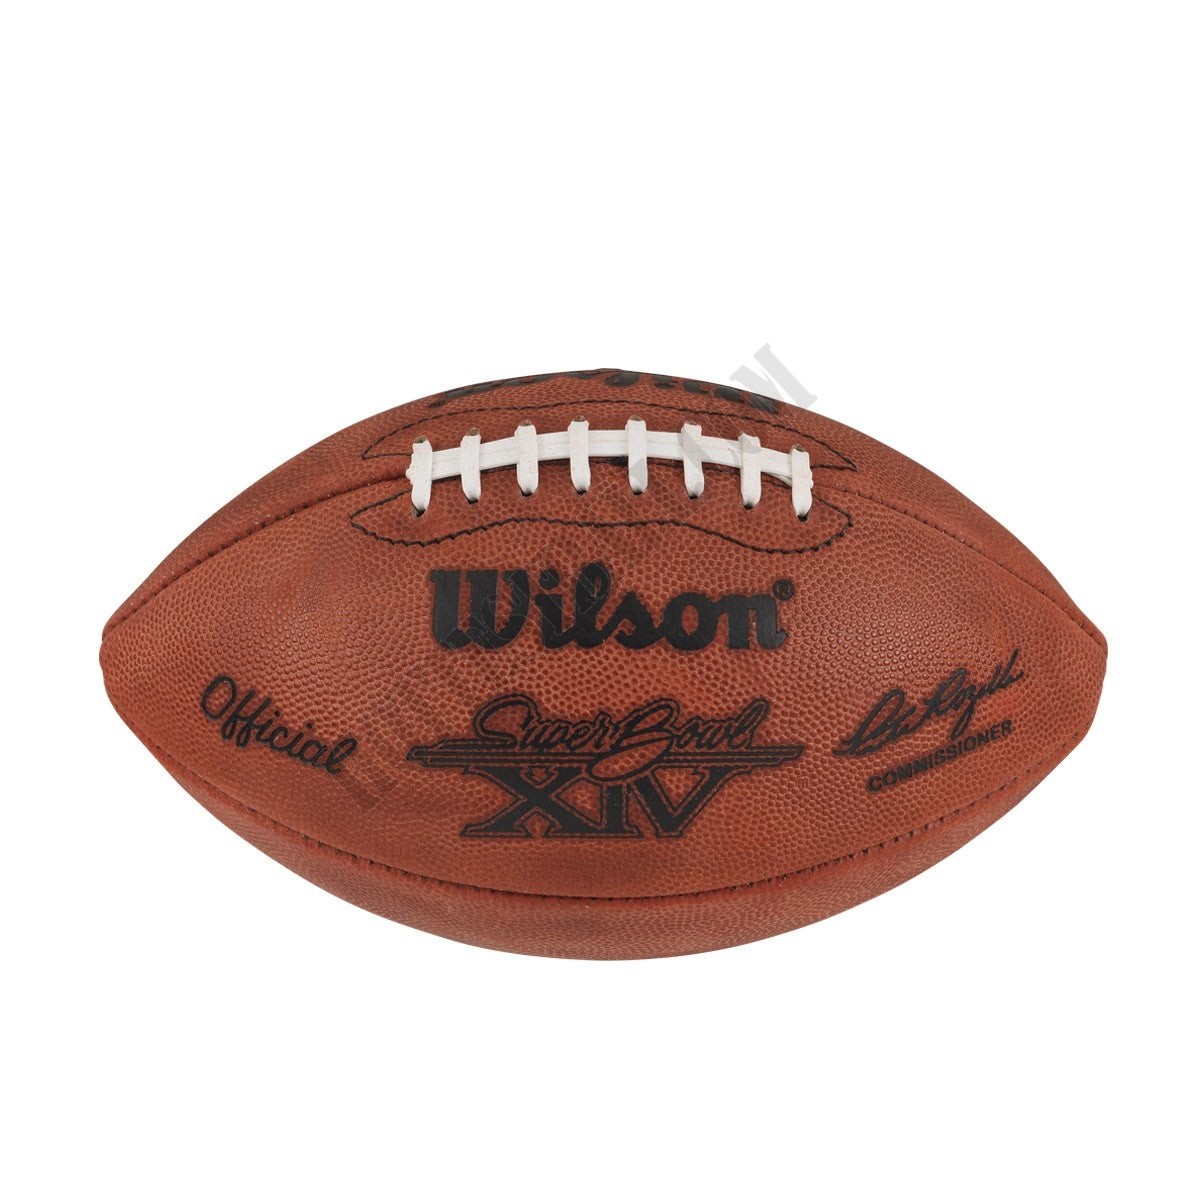 Super Bowl XIV Game Football - Pittsburgh Steelers ● Wilson Promotions - -0